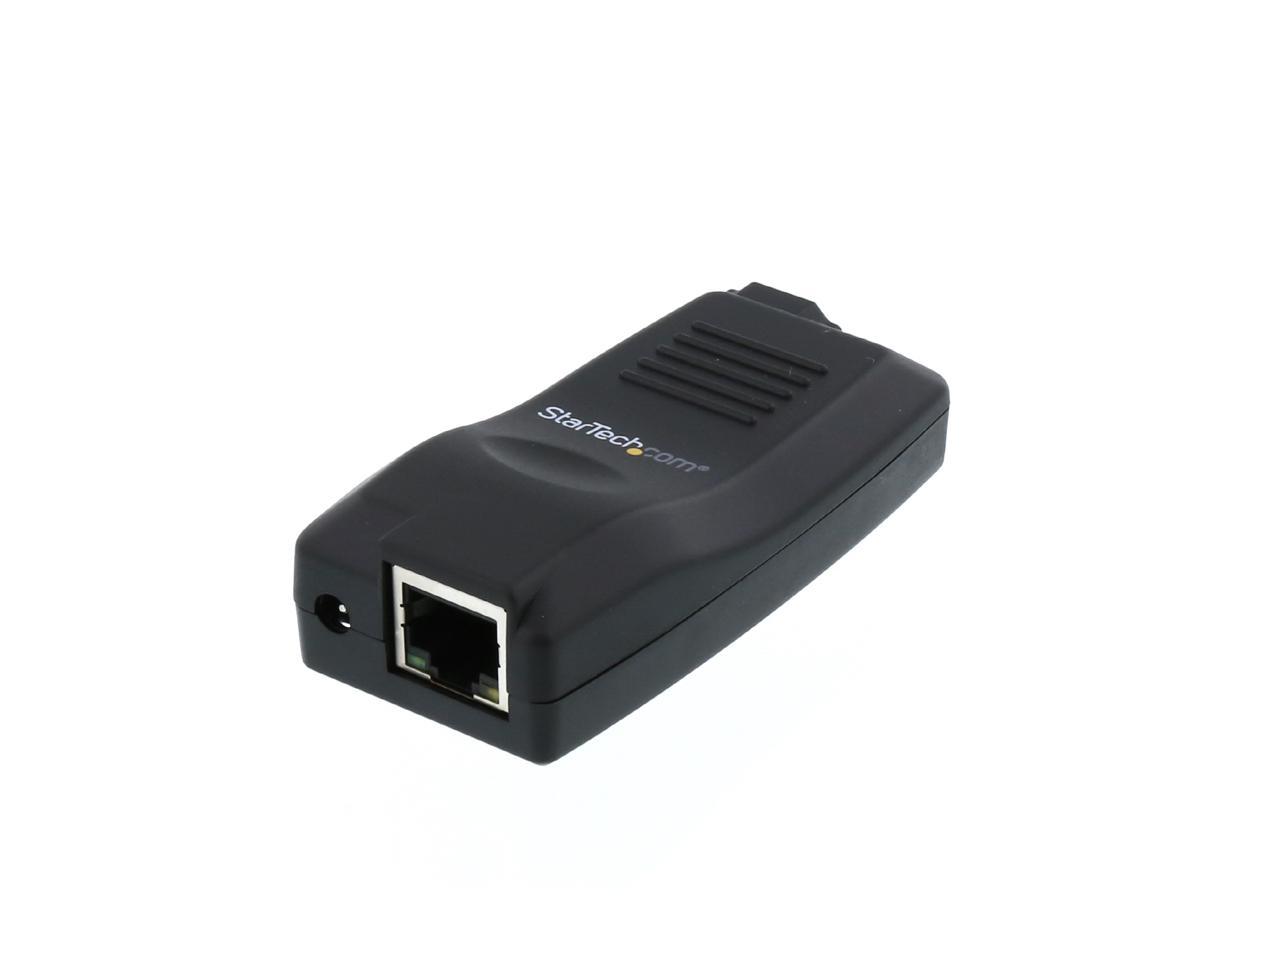 Lrp electronic port devices driver download